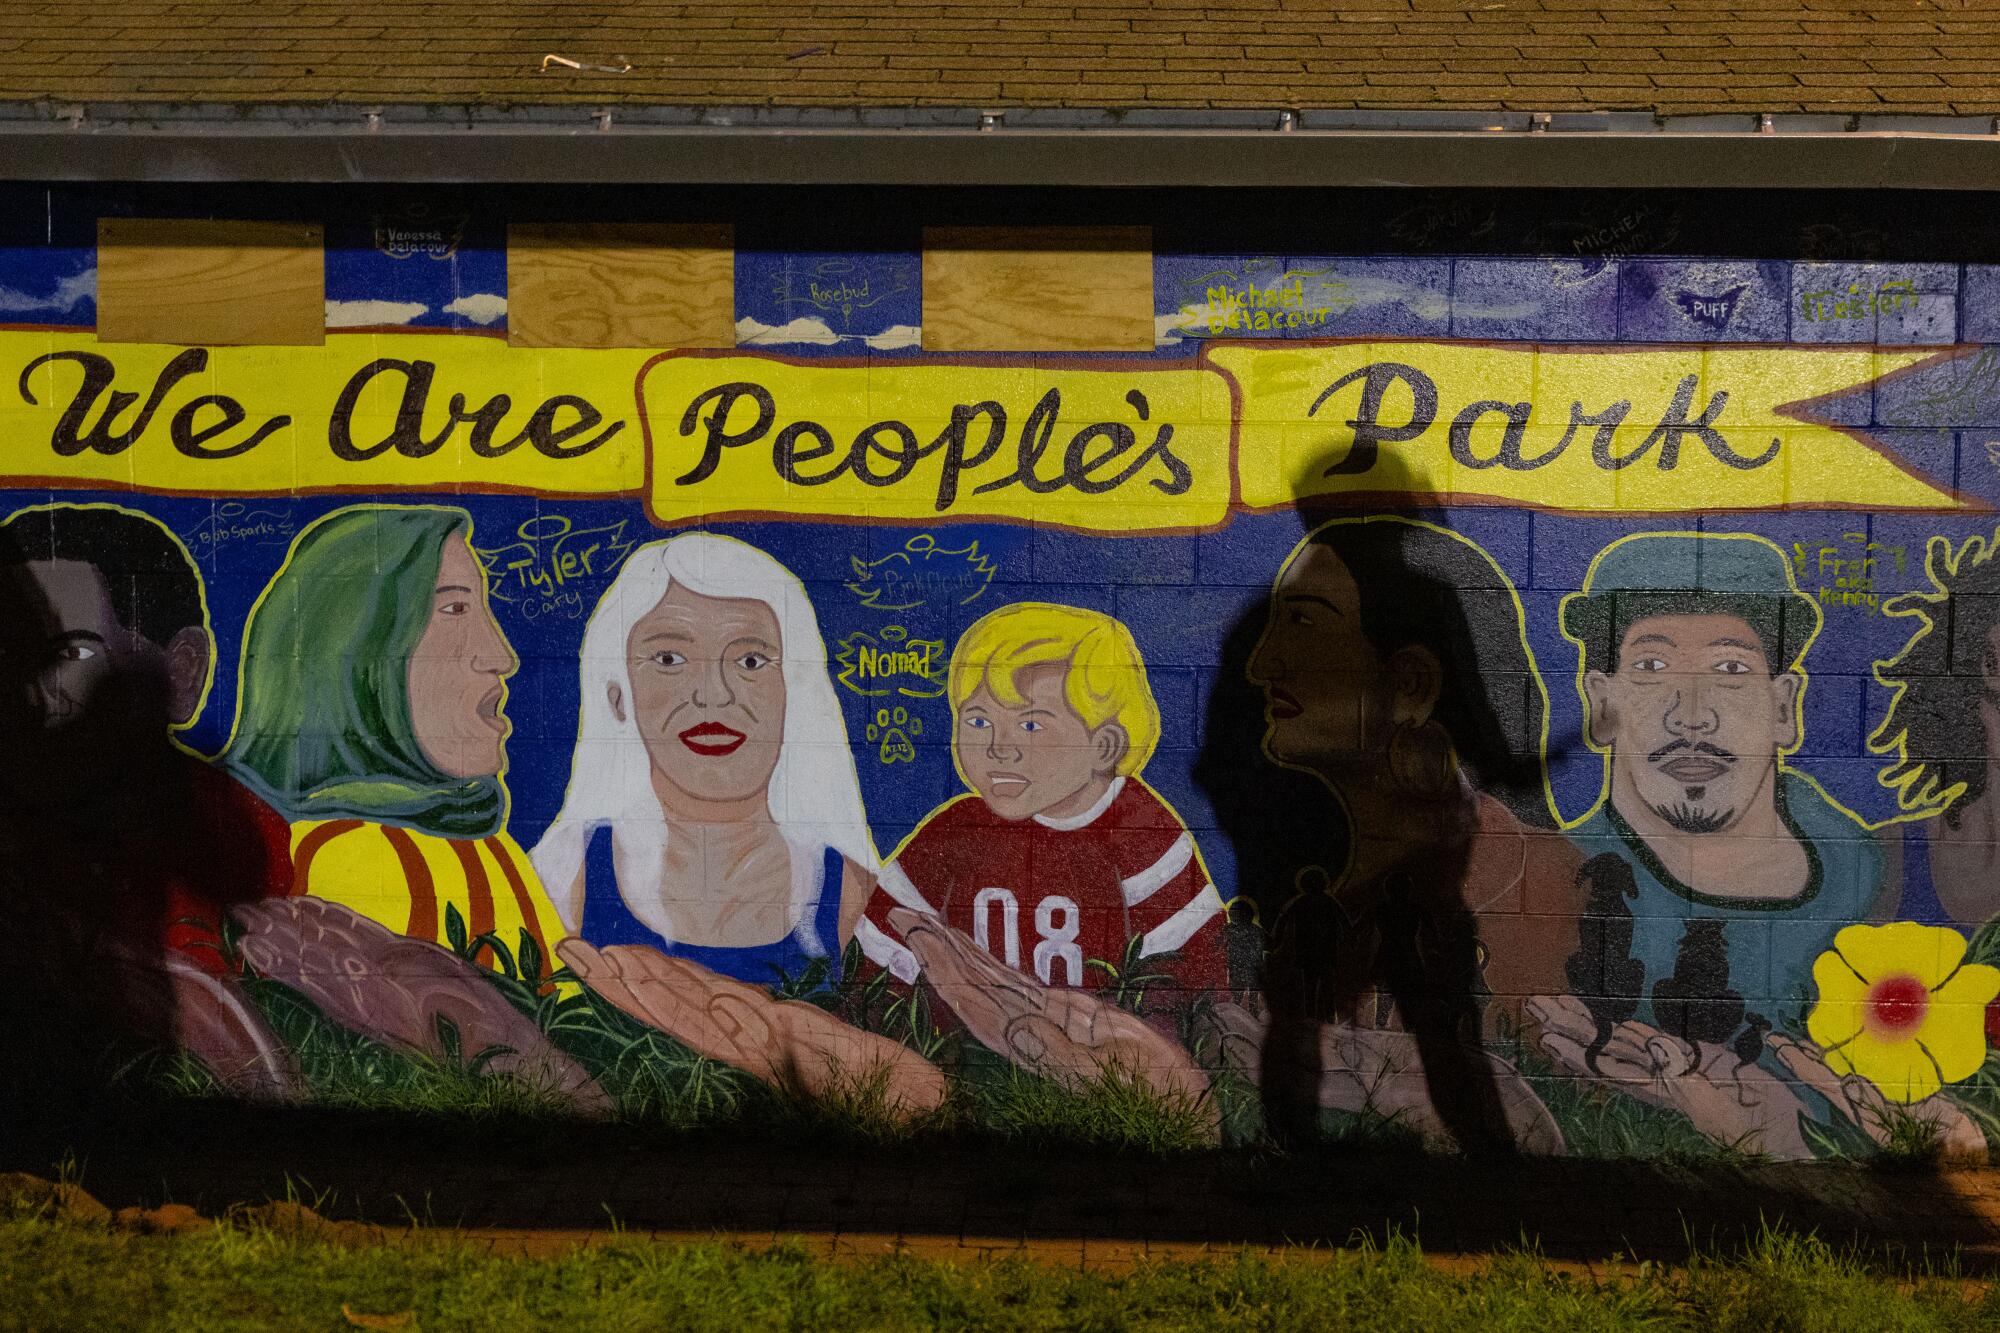 A colorful mural at People's Park